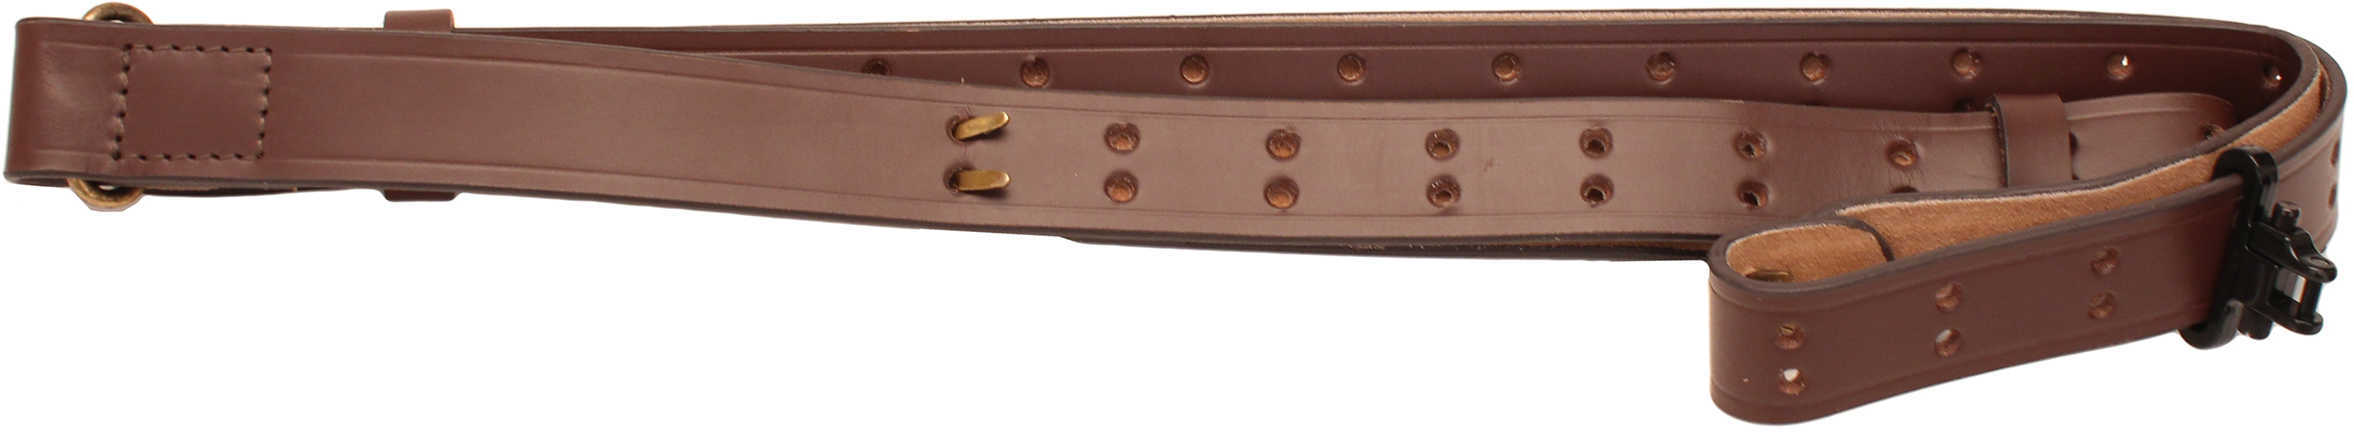 Allen 8145 Cobra 1.60" X 20.30" Brown Leather Rifle Sling With Swivels